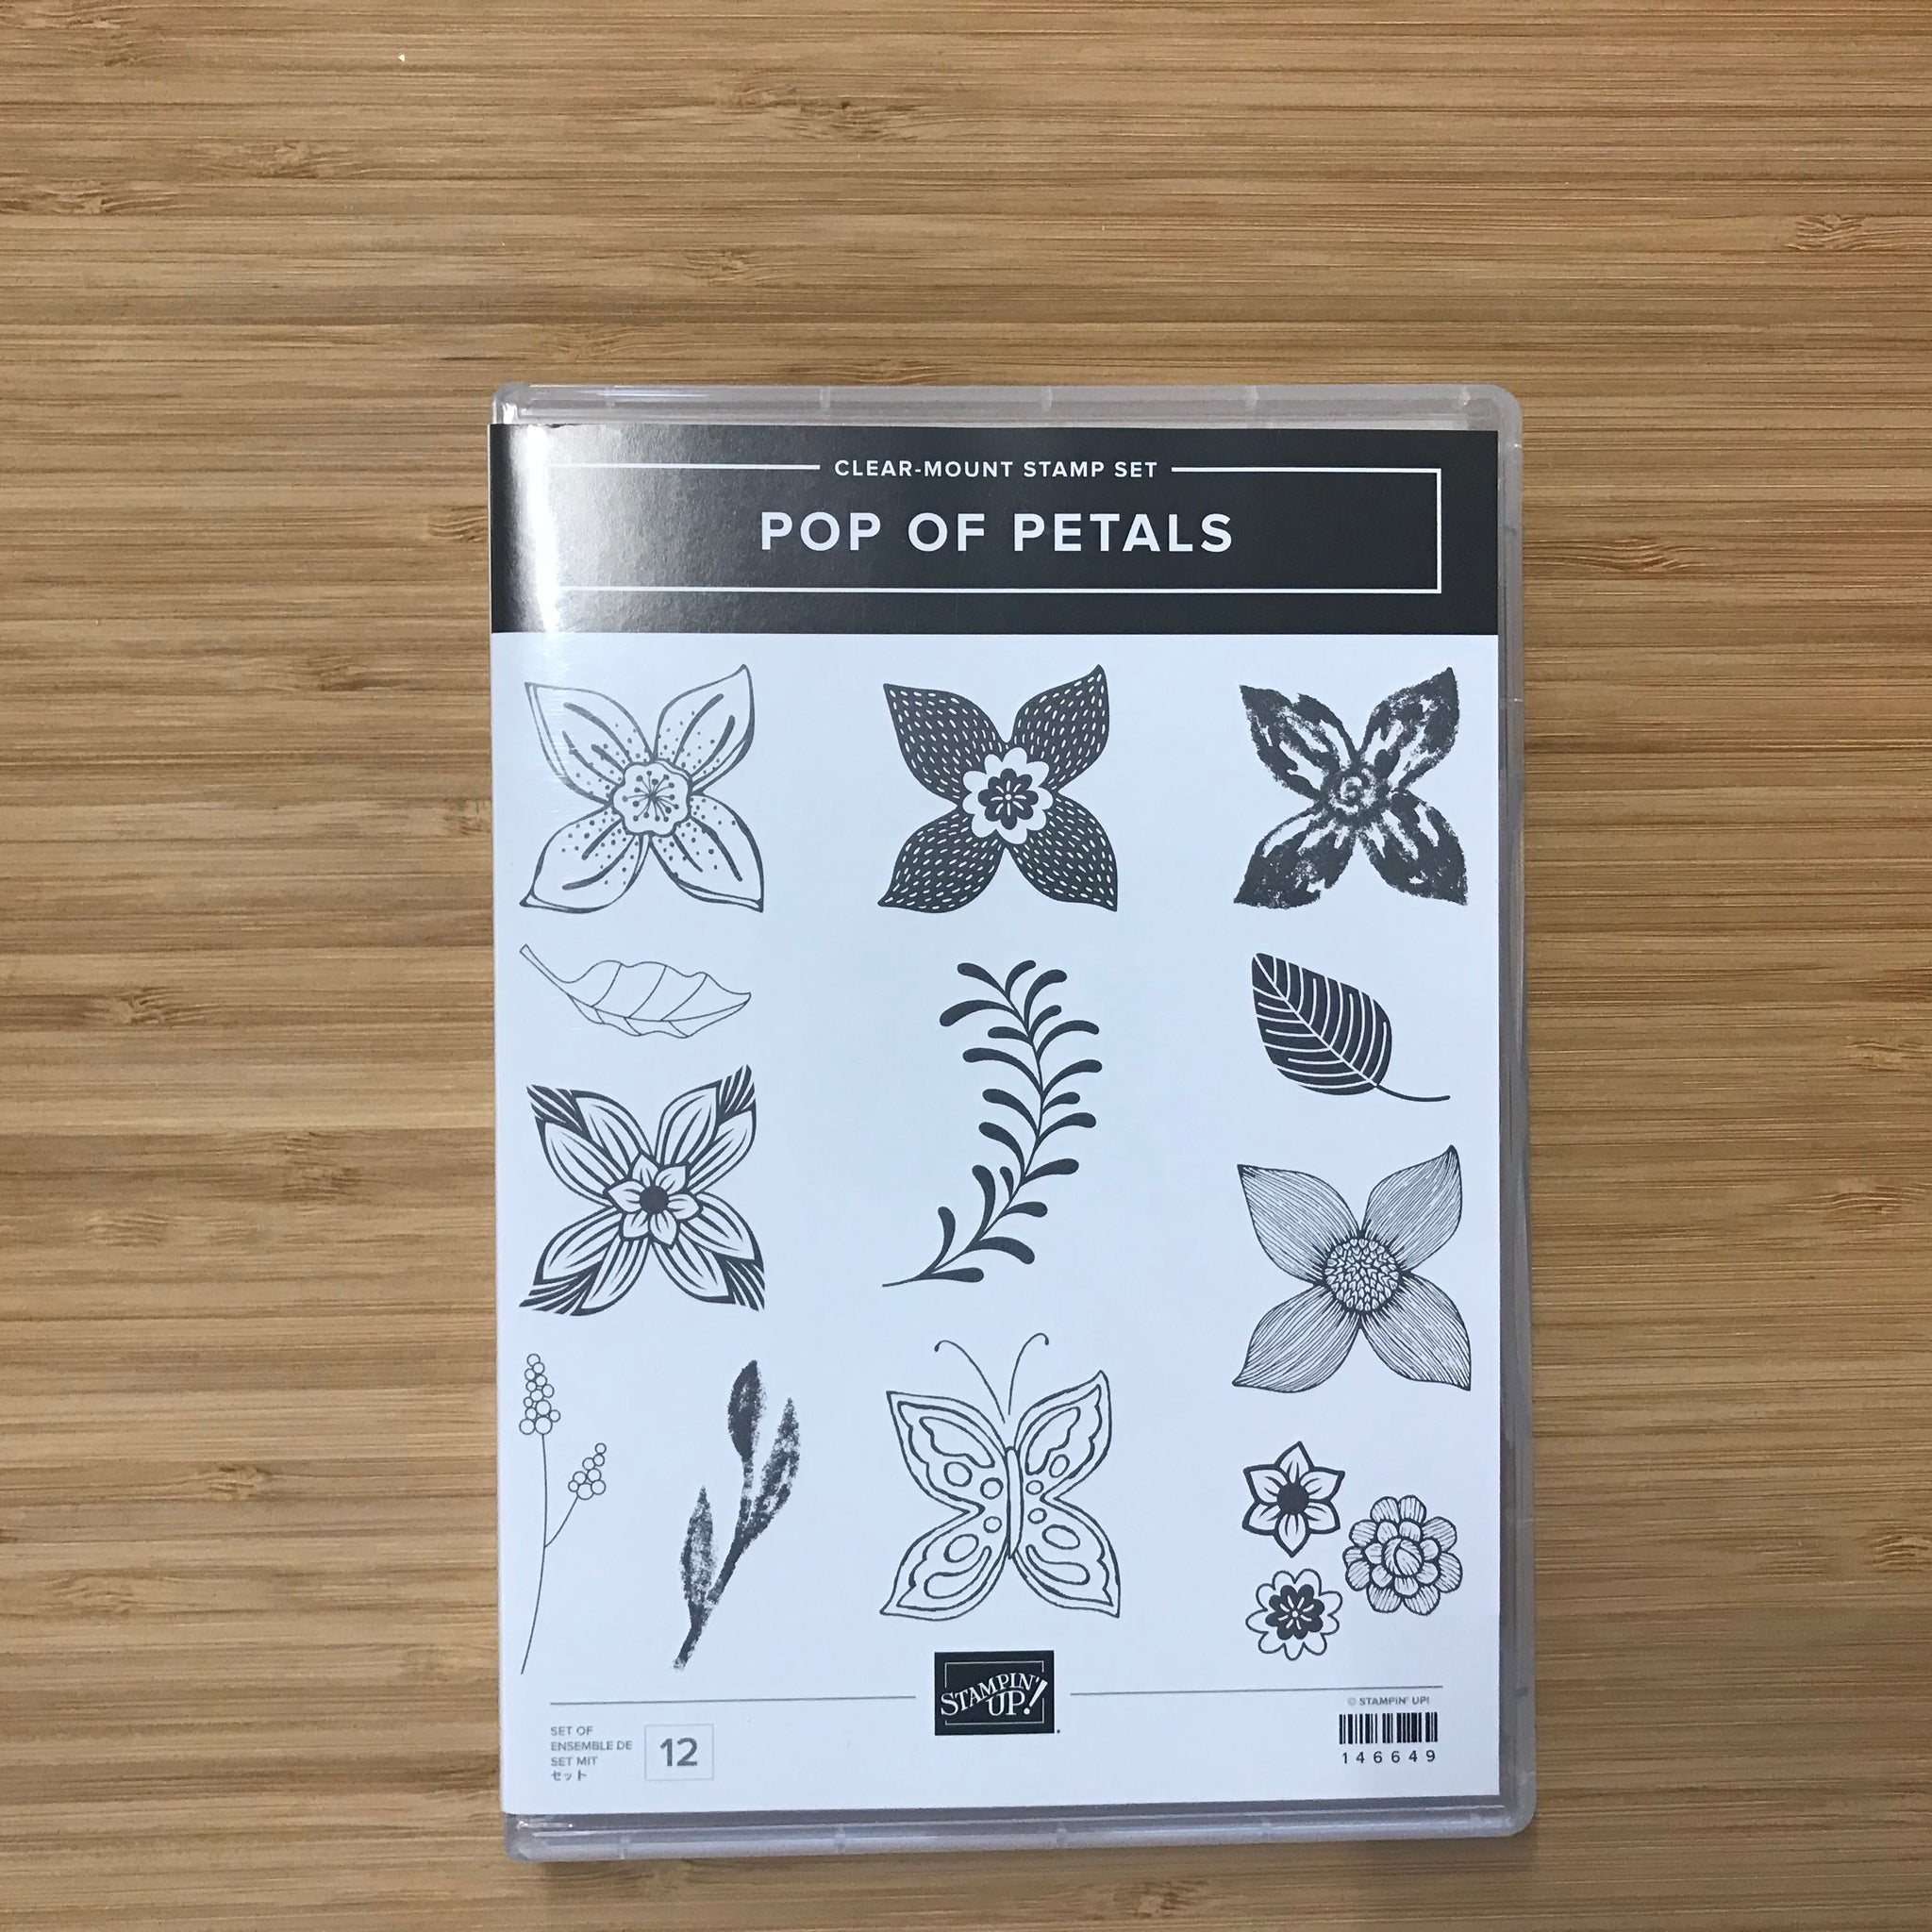 Pop of Petals | Retired Clear-Mount Stamp Set | Stampin' Up!®